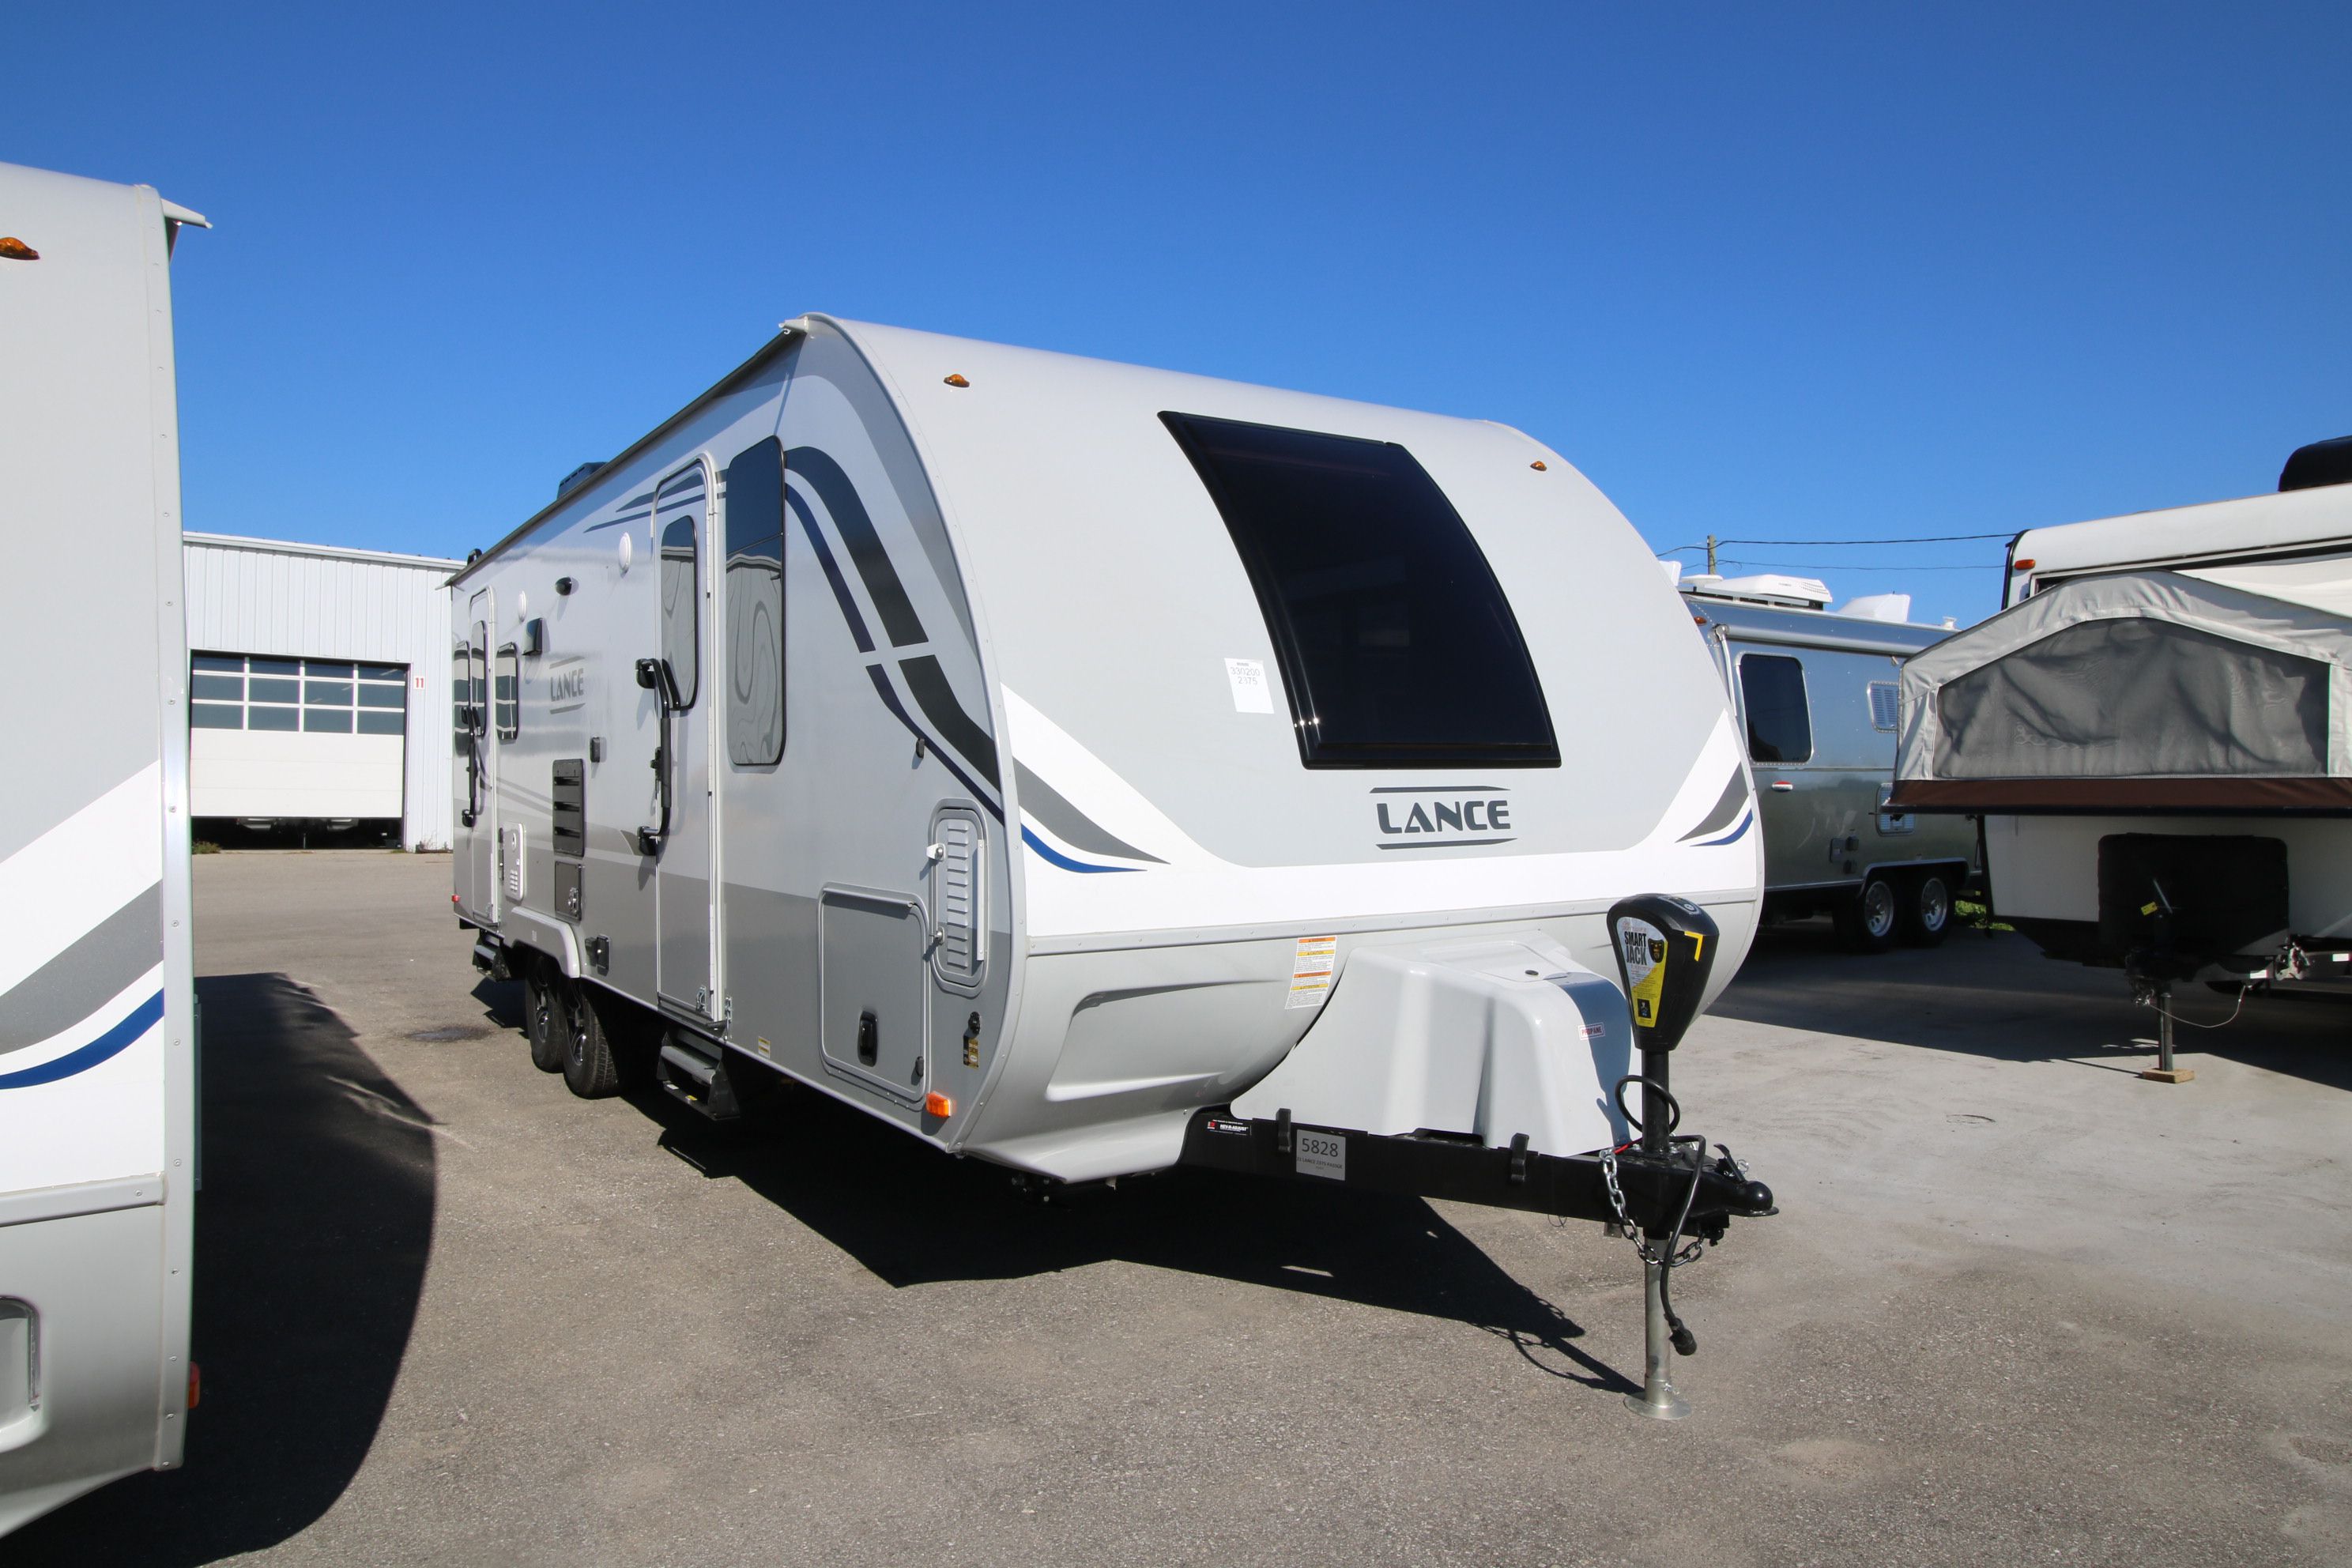 Lance Travel trailers for sale